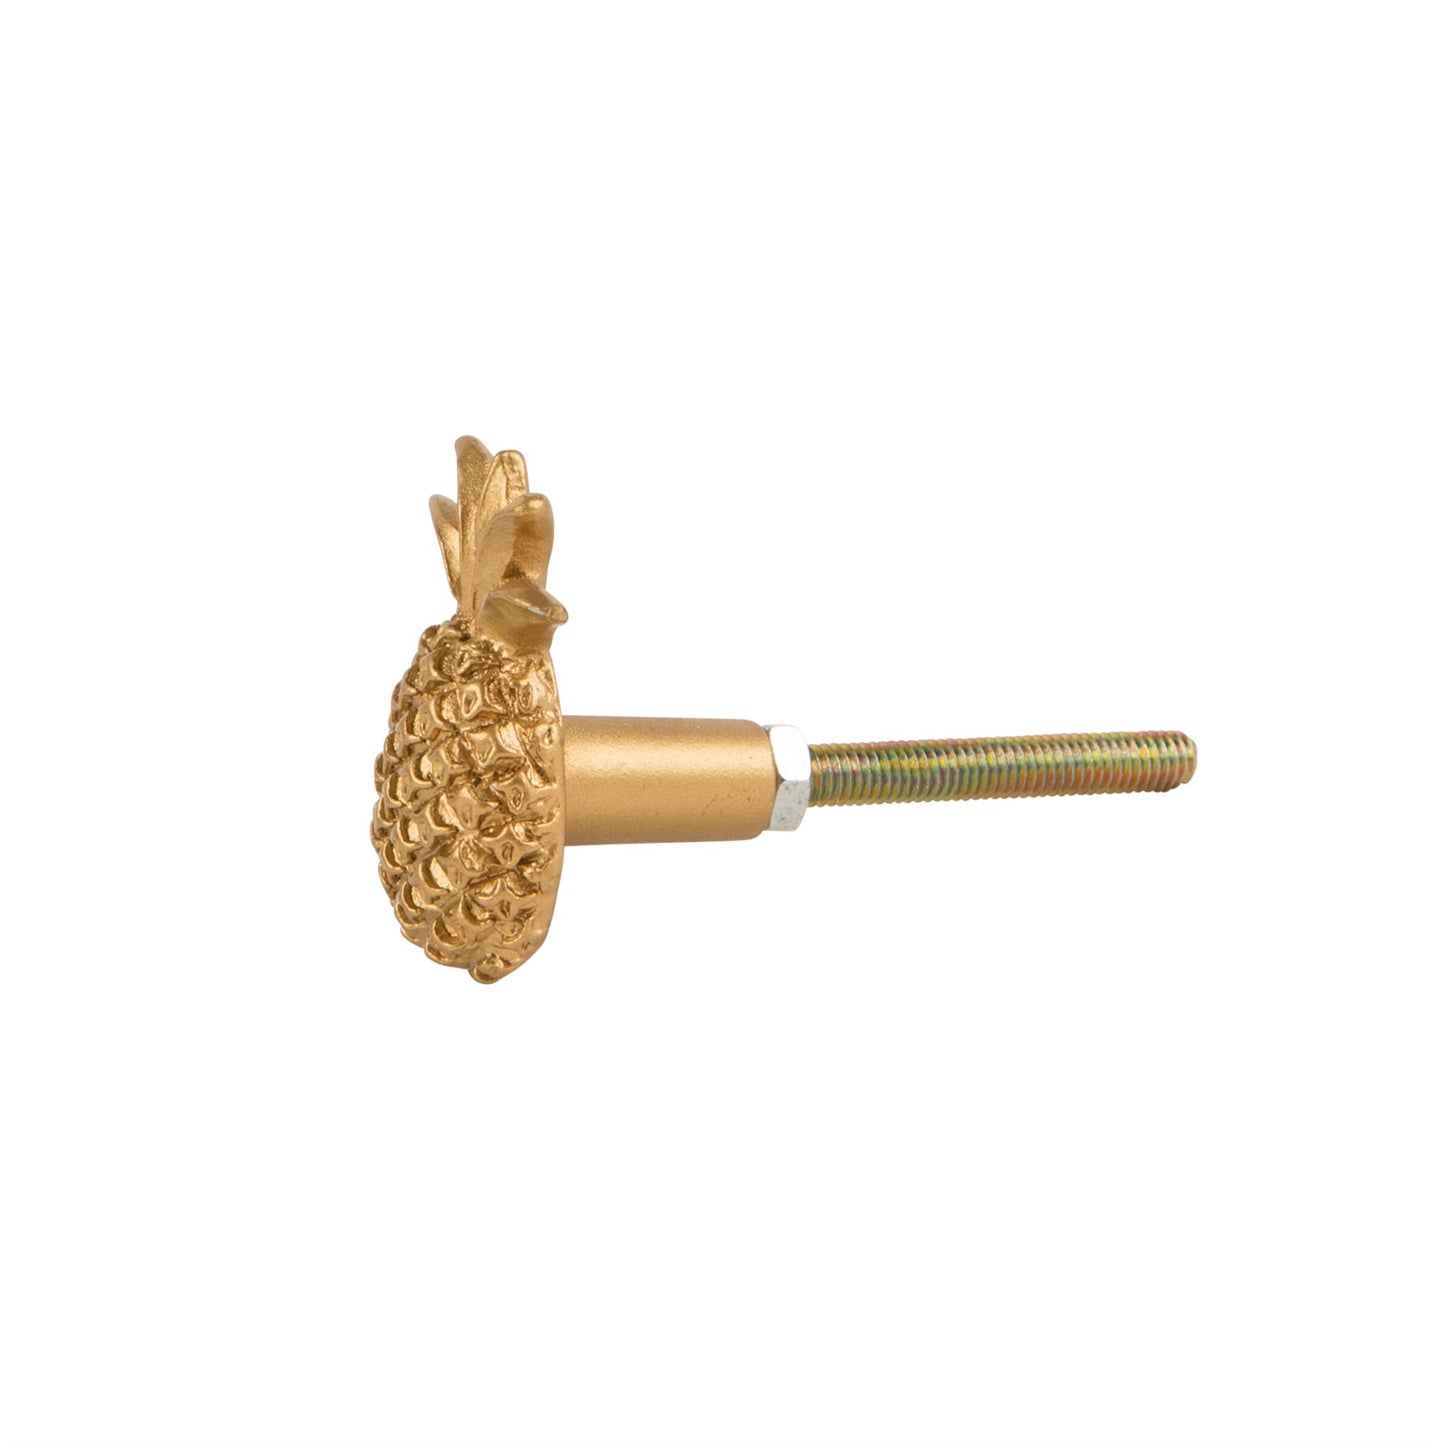 Gold Pineapple Draw Knob By Sass & Belle